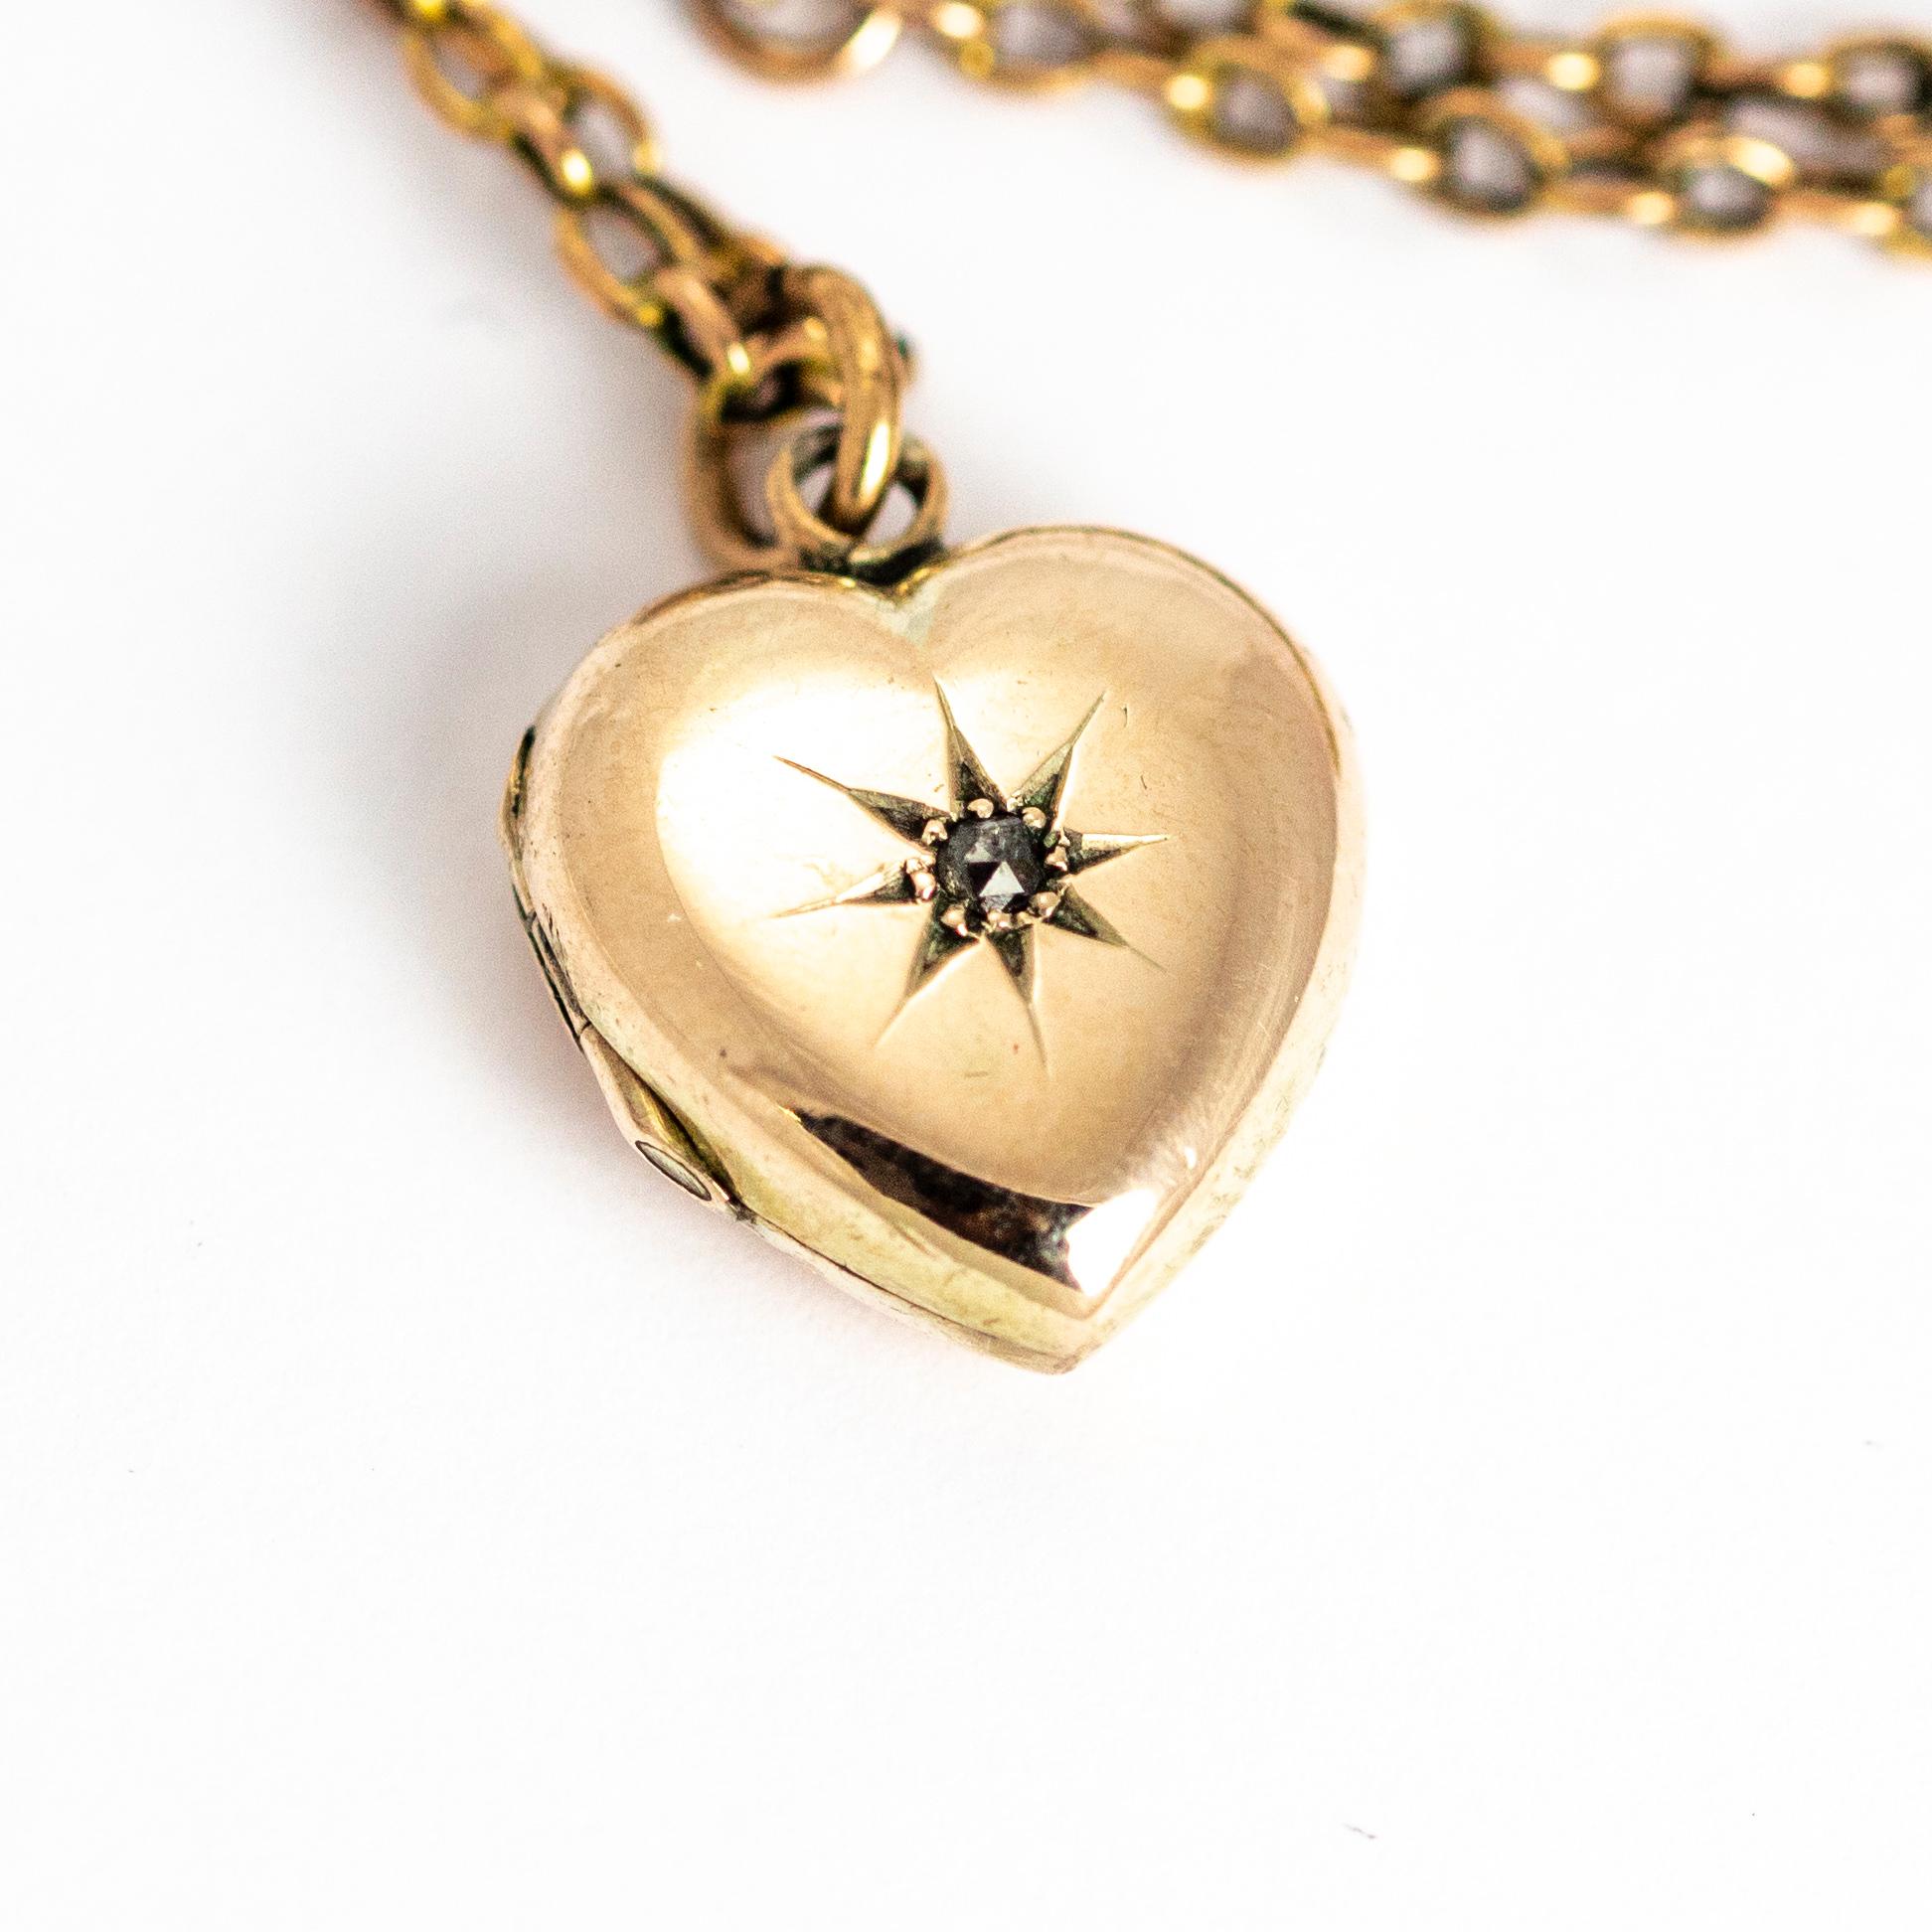 A beautiful vintage small heart-shaped locket set with a rose cut diamond in a radiant eight pointed star setting. The locket sits on a chain measuring 24.9 cm (9.8 inches). All modelled in 9 karat yellow gold

Locket Height: 1.5 cm

Locket Width: